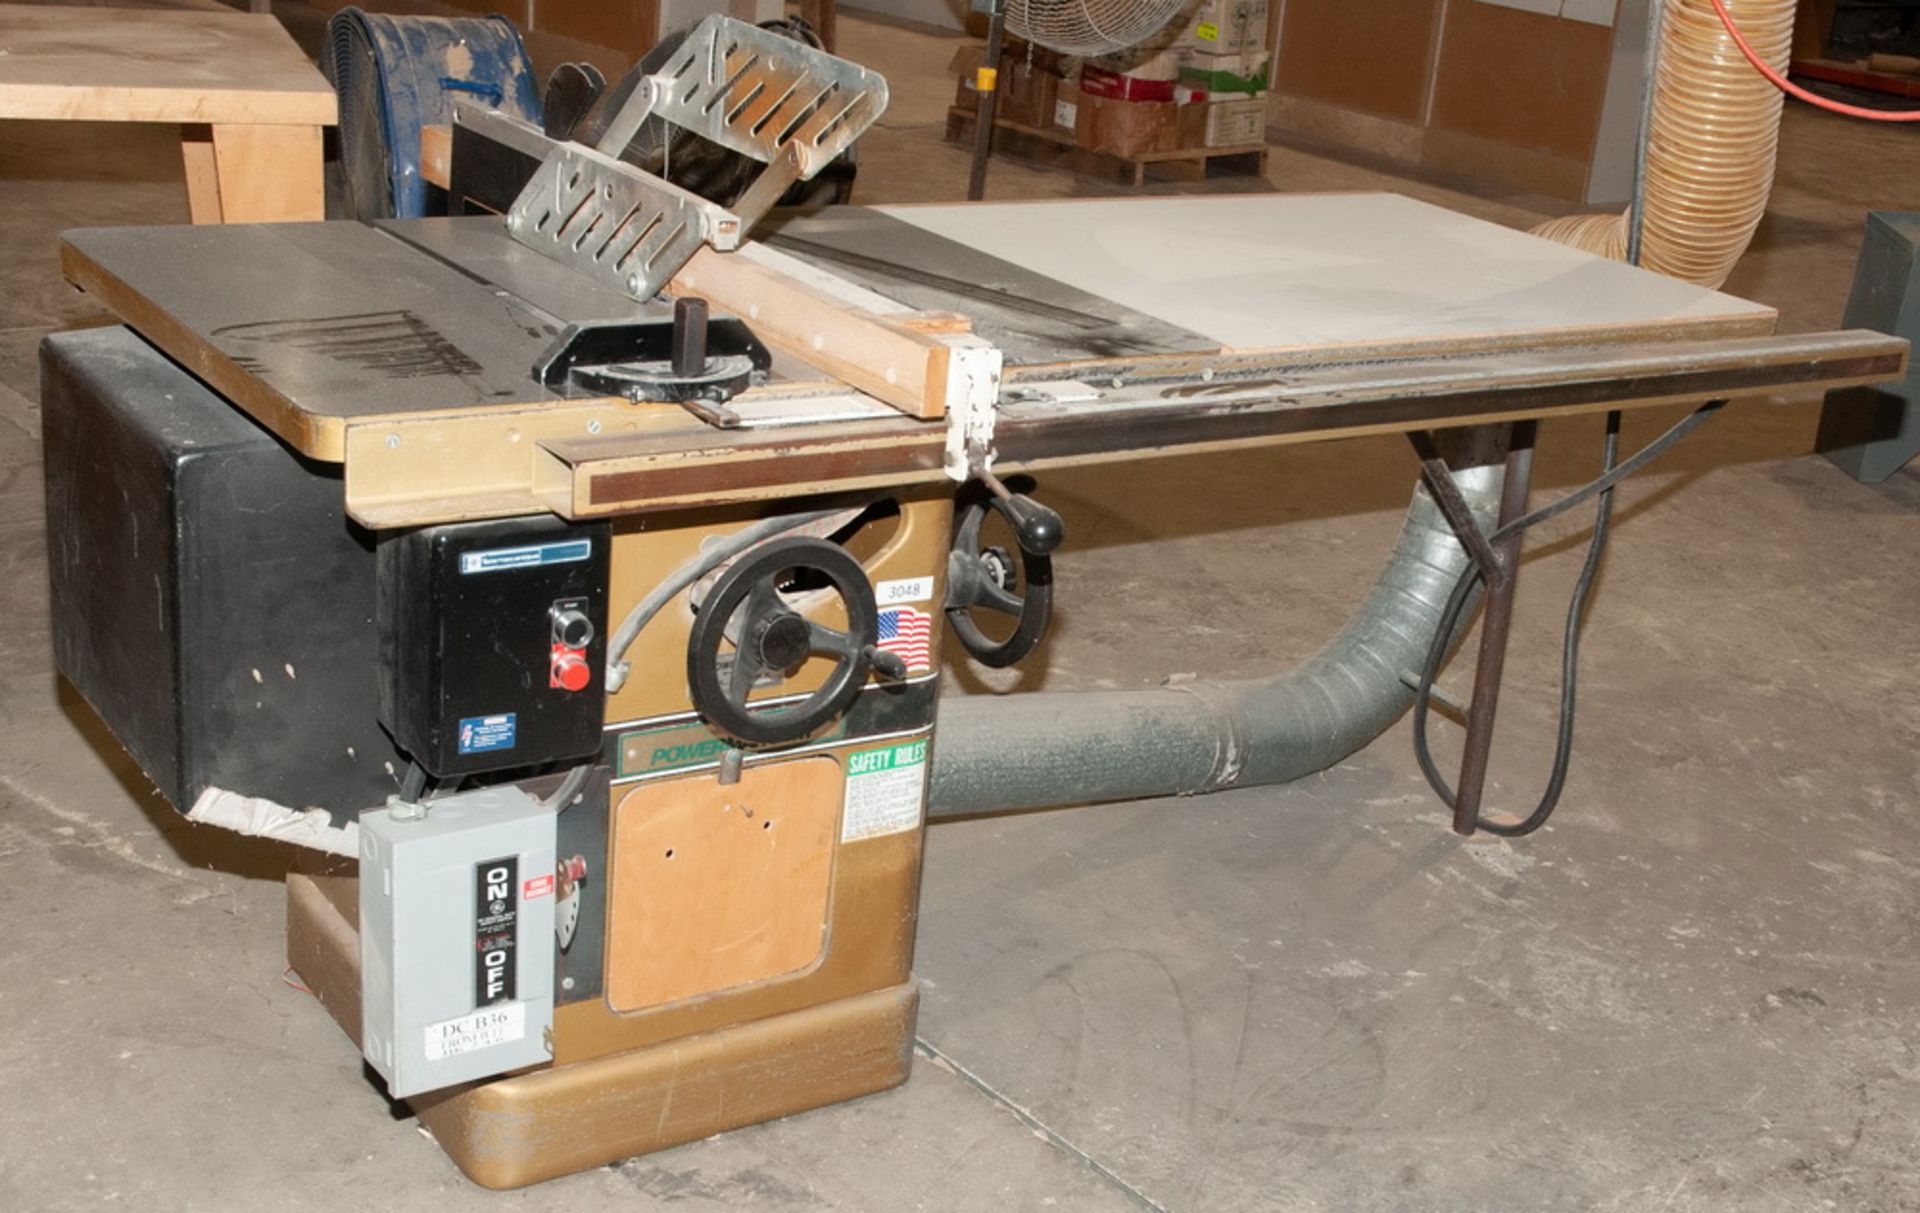 Powermatic Table Saw Model 66, s/n 93662221, Approx. 38 1/2 x 28 Table, w/ 35 x 28 Inch Extension